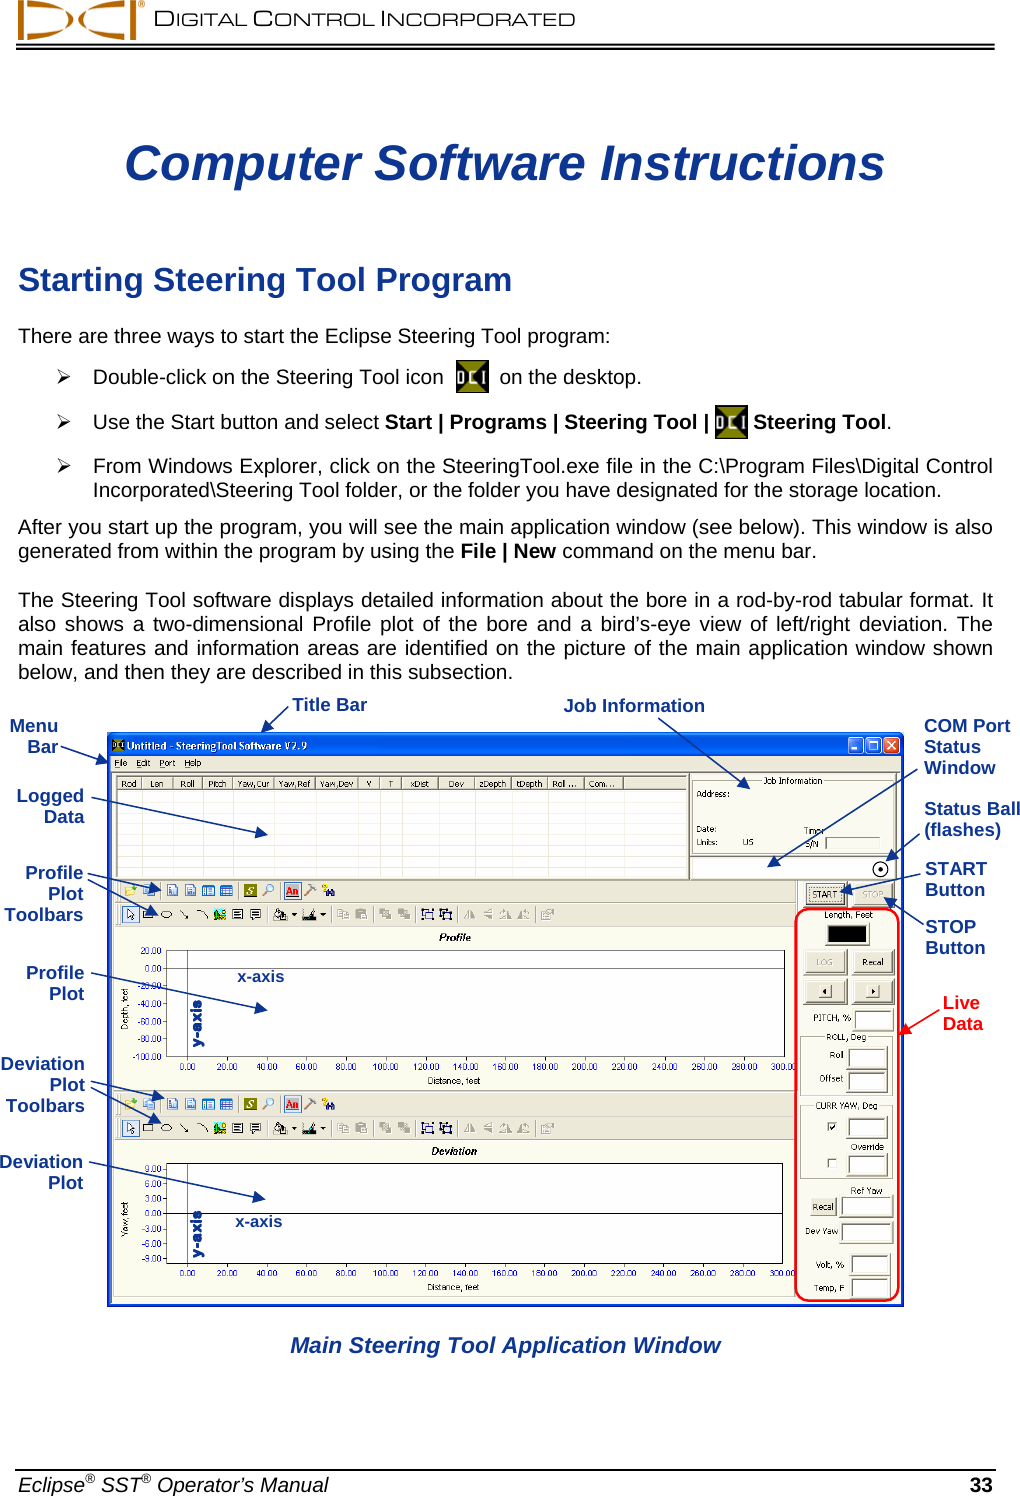  DIGITAL CONTROL INCORPORATED  Computer Software Instructions  Starting Steering Tool Program There are three ways to start the Eclipse Steering Tool program:  ¾  Double-click on the Steering Tool icon     on the desktop. ¾  Use the Start button and select Start | Programs | Steering Tool |   Steering Tool. ¾  From Windows Explorer, click on the SteeringTool.exe file in the C:\Program Files\Digital Control Incorporated\Steering Tool folder, or the folder you have designated for the storage location.  After you start up the program, you will see the main application window (see below). This window is also generated from within the program by using the File | New command on the menu bar.  The Steering Tool software displays detailed information about the bore in a rod-by-rod tabular format. It also shows a two-dimensional Profile plot of the bore and a bird’s-eye view of left/right deviation. The main features and information areas are identified on the picture of the main application window shown below, and then they are described in this subsection.  Title Bar Job Information  Main Steering Tool Application Window Menu  Bar Logged  Data   COM Port Status Window Deviation  Plot Profile  Plot  x-axis Status Ball (flashes) STARTButton Live Data   STOP Button Profile Plot Toolbars Deviation Plot Toolbars  x-axis Eclipse® SST® Operator’s Manual  33 